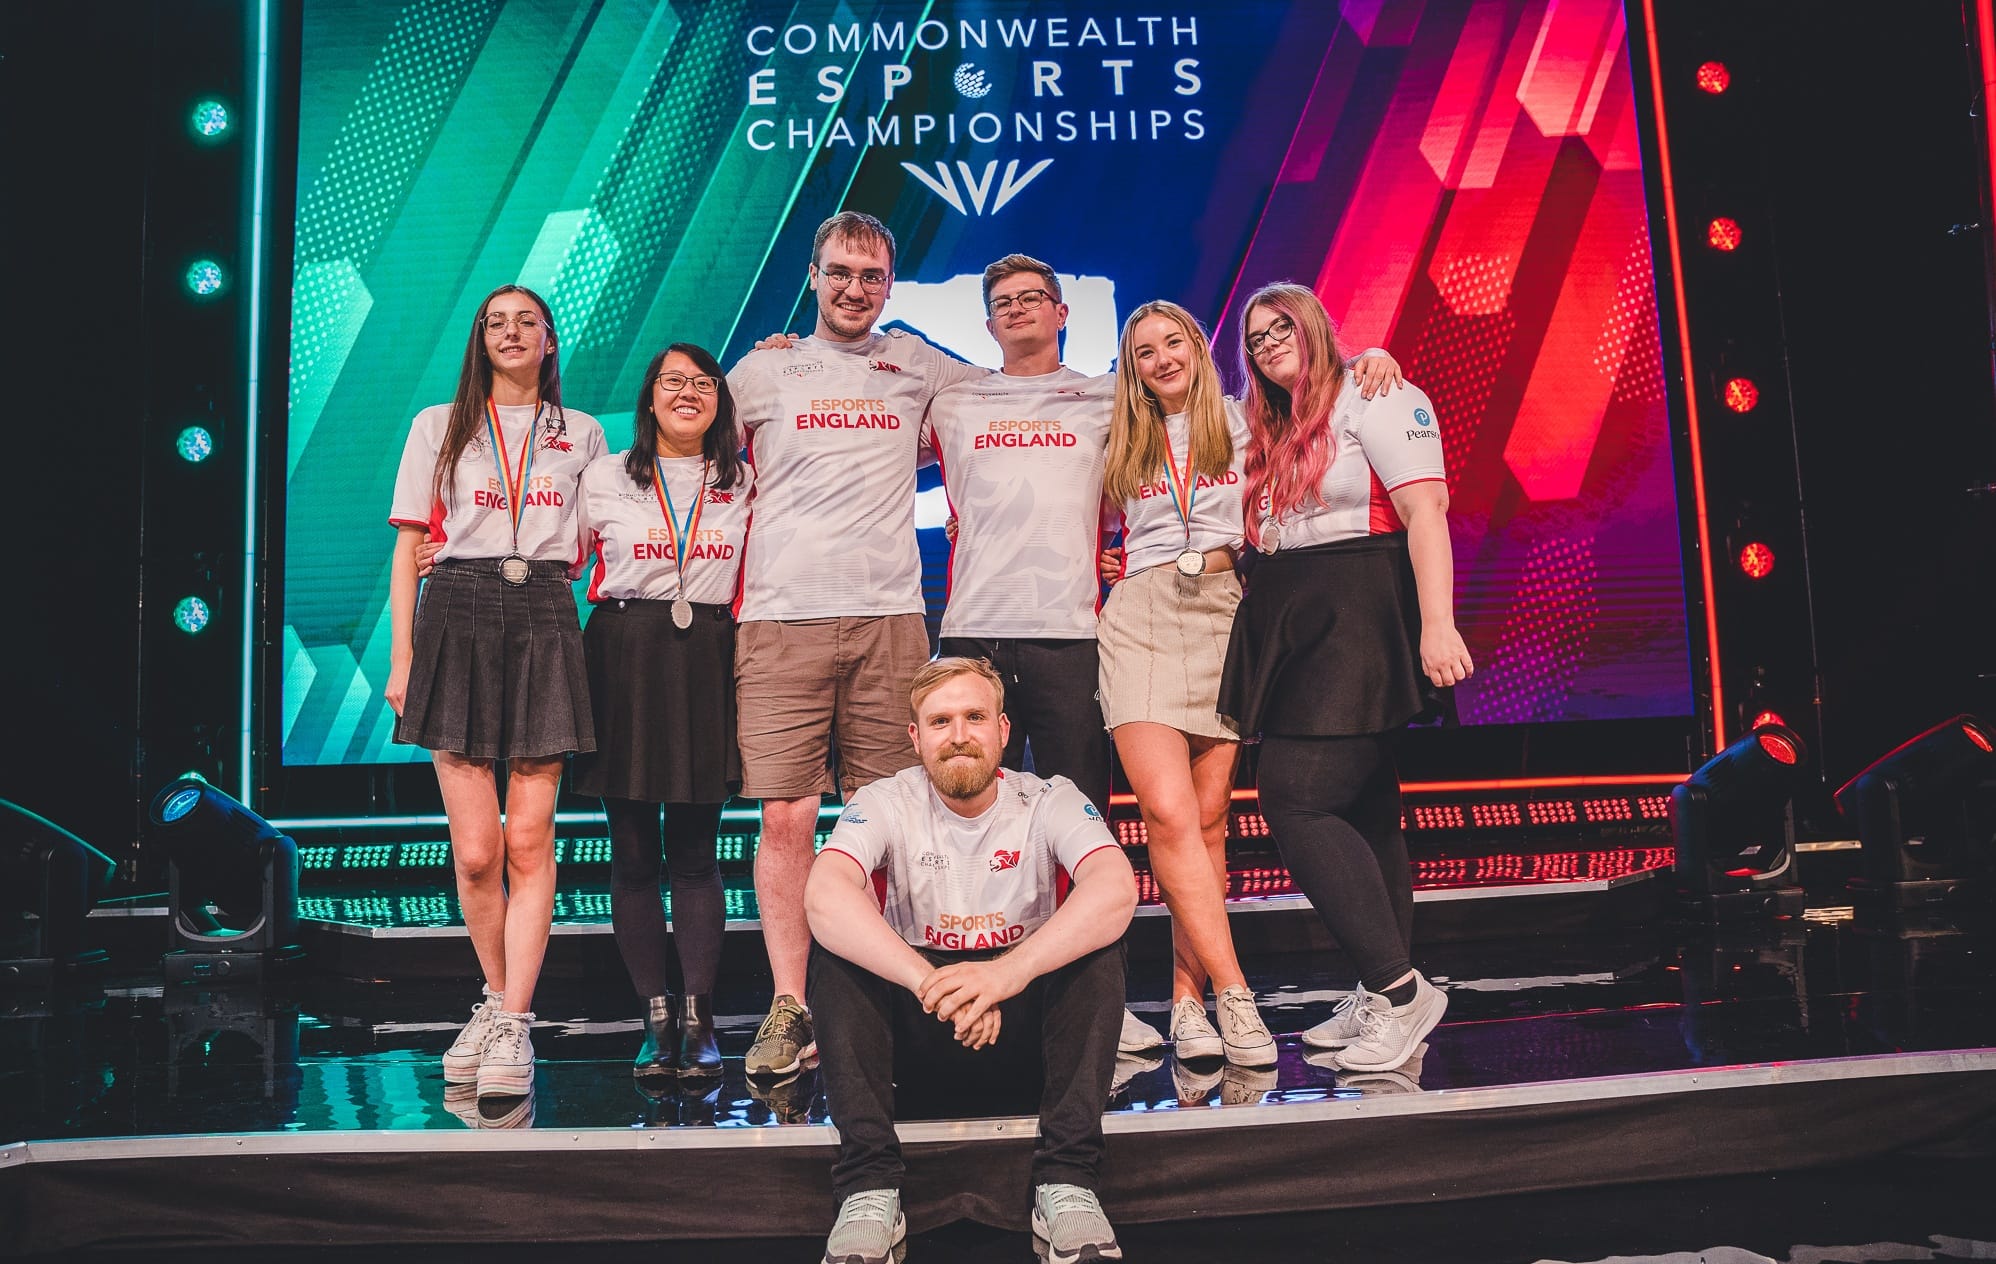 7 members of the England Esports team posing with their medals after the Womens Dota 2 esports event at the Commonwealth Esports Championships